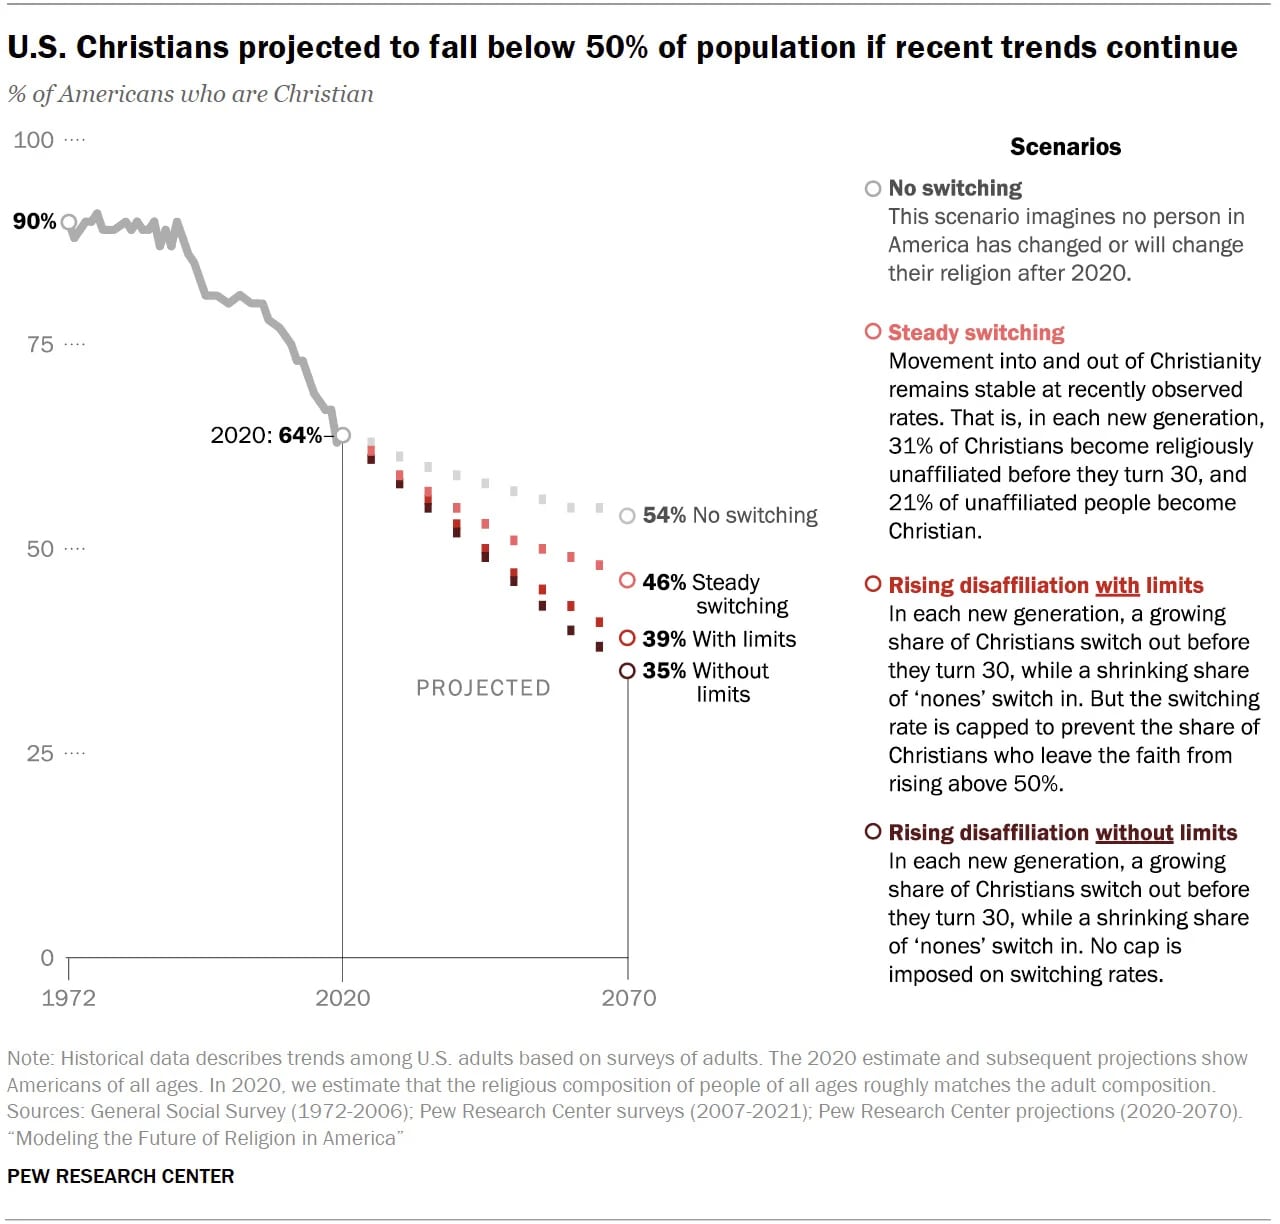 pew research projections